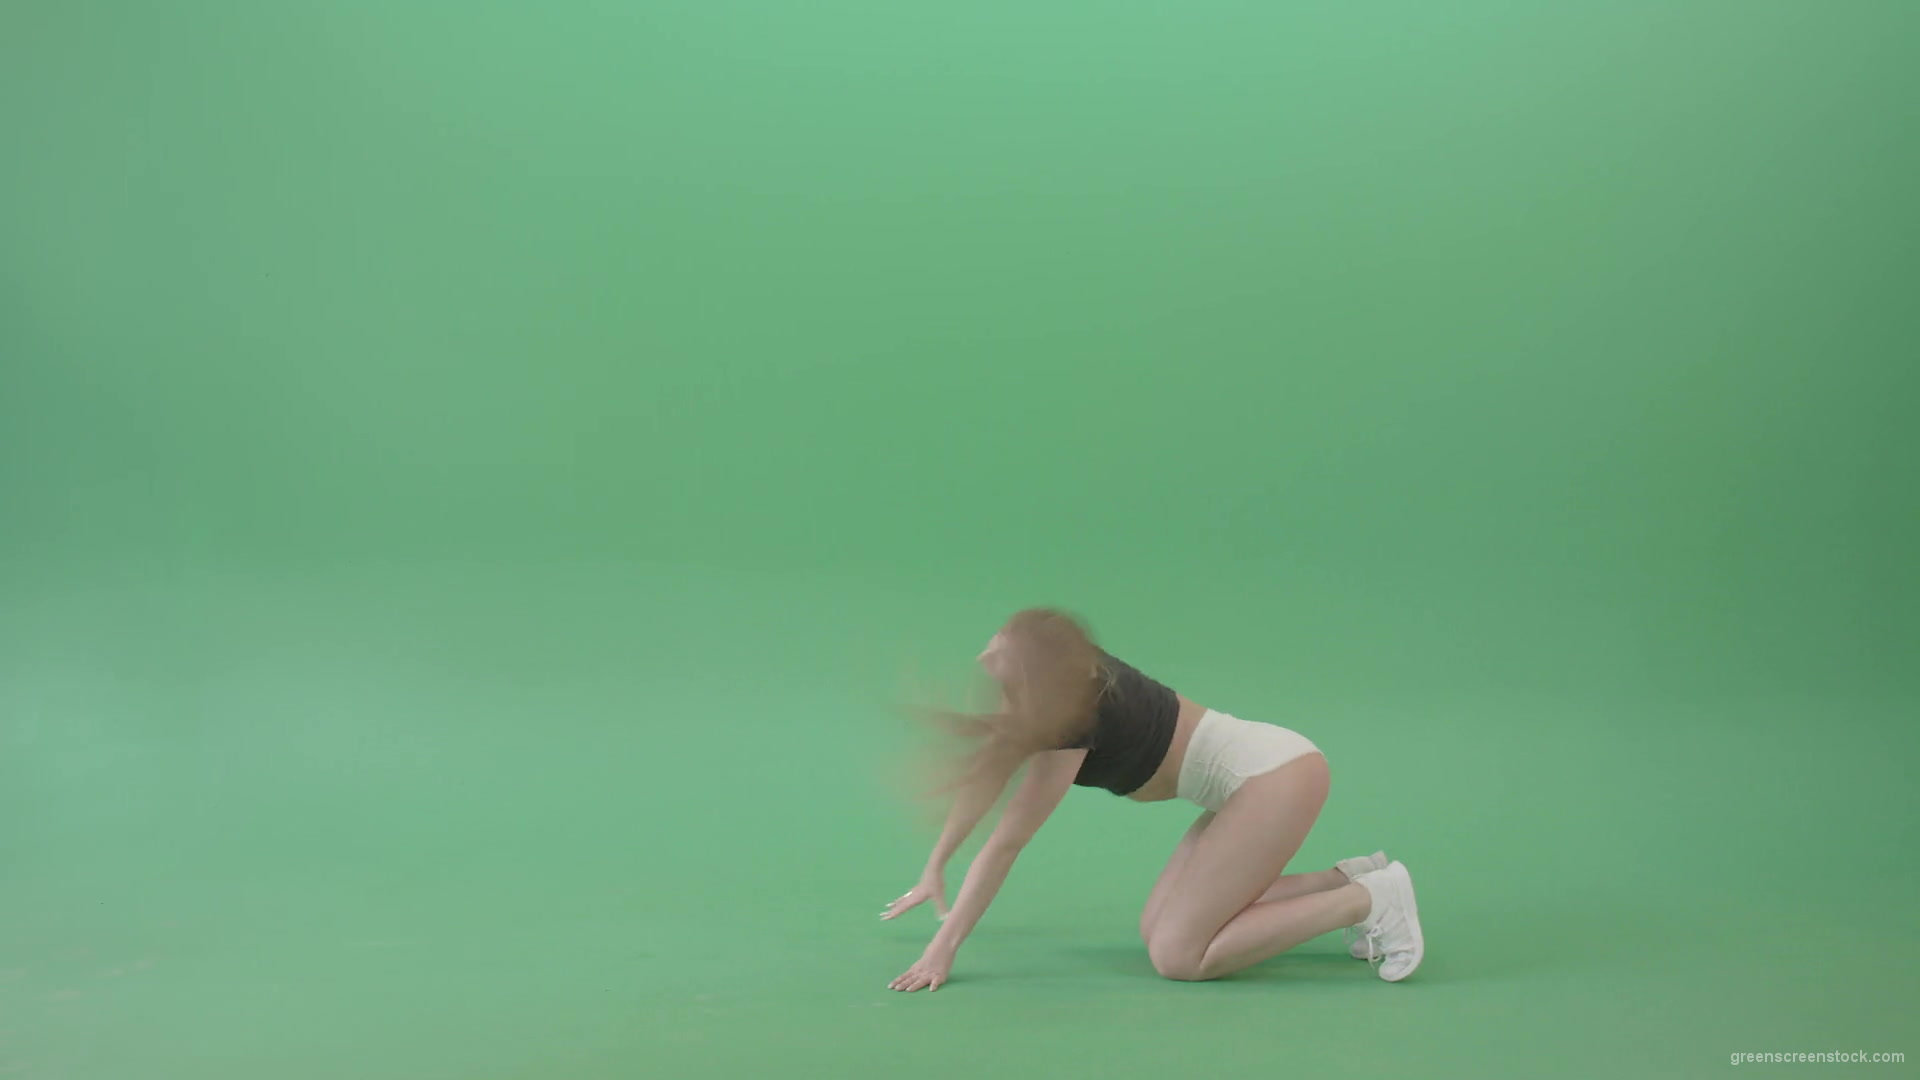 American-girl-twerking-ass-isolated-on-green-background-4k-Video-Footage-1920_005 Green Screen Stock